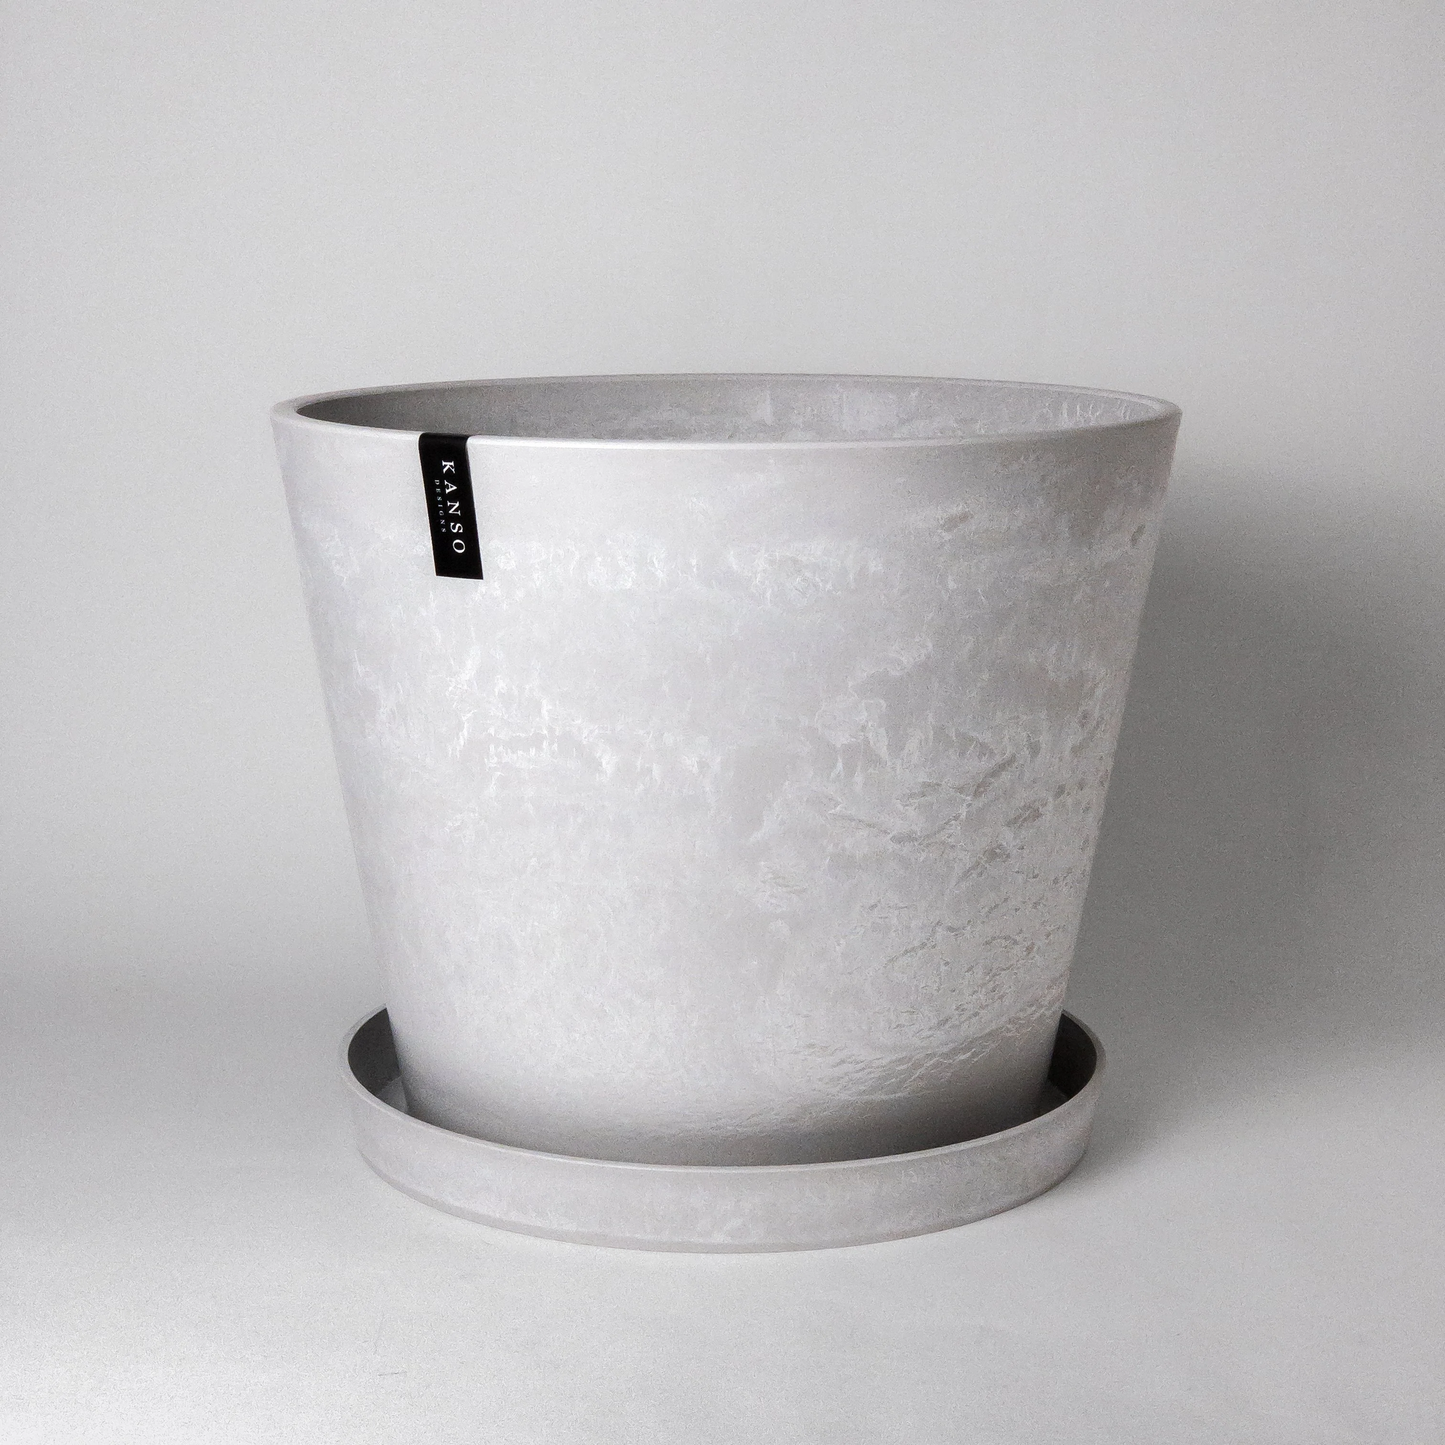 Signature Tapered Planter with Drainage in 15 inch Diameter